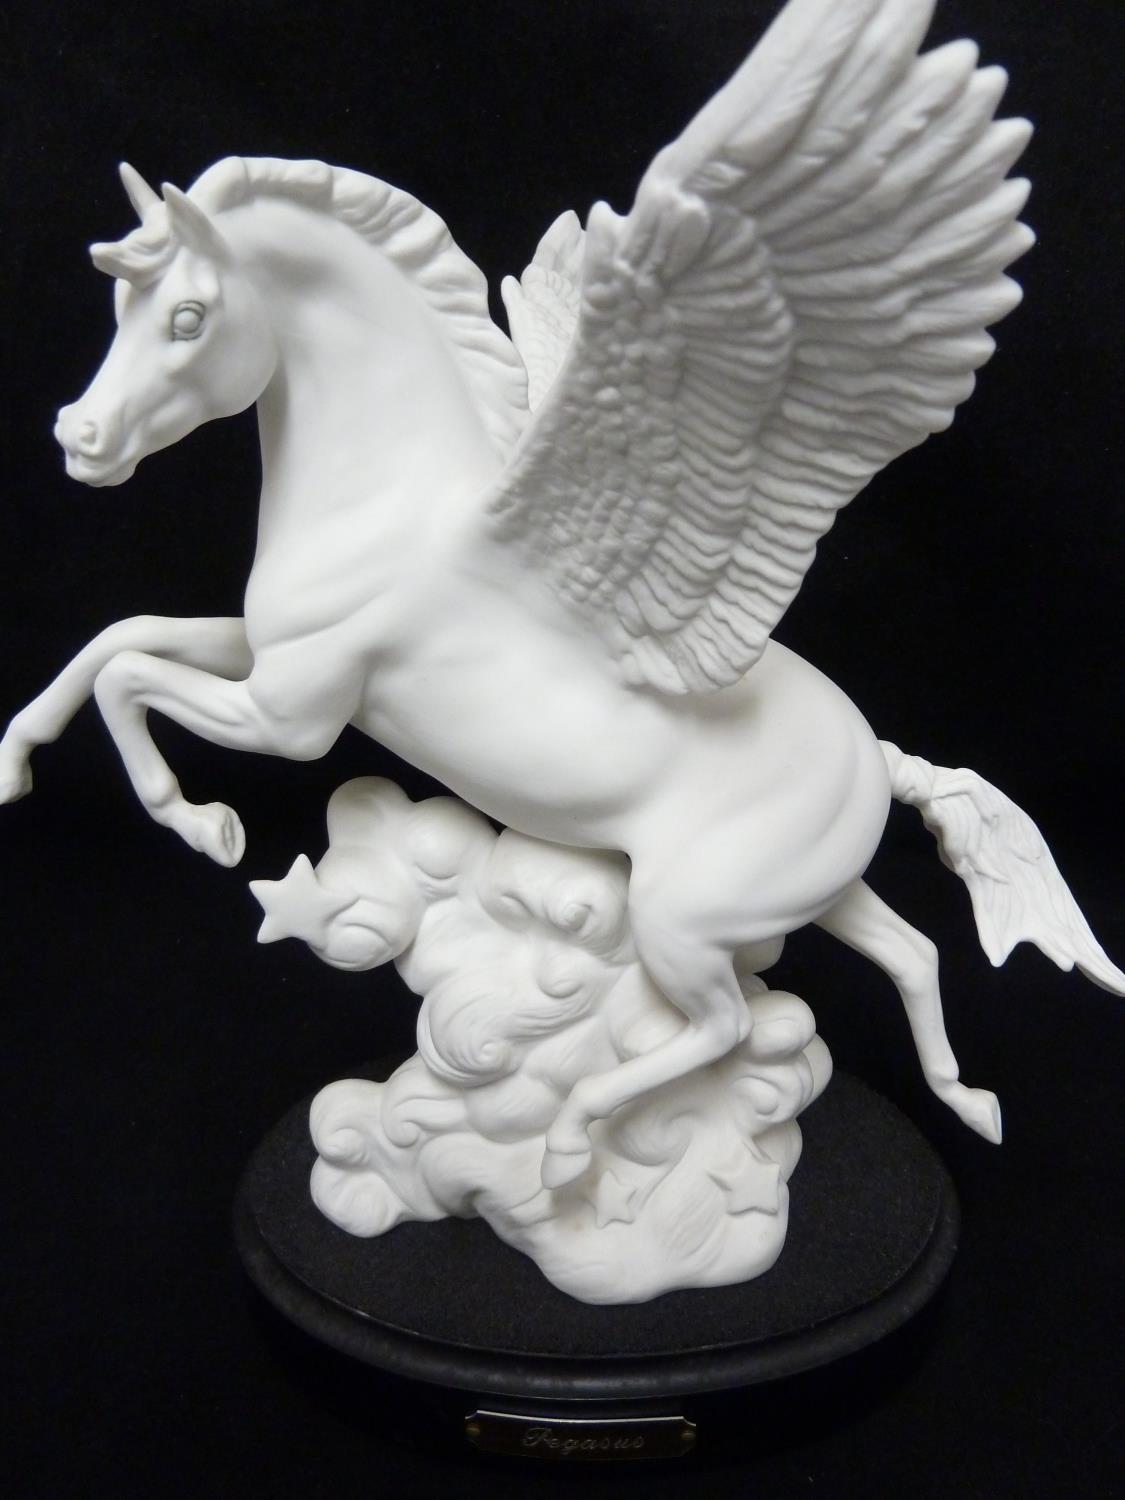 Pegasus - A Royal Doulton figure of a horse with wings atop a cloud with stars, HN3547, together